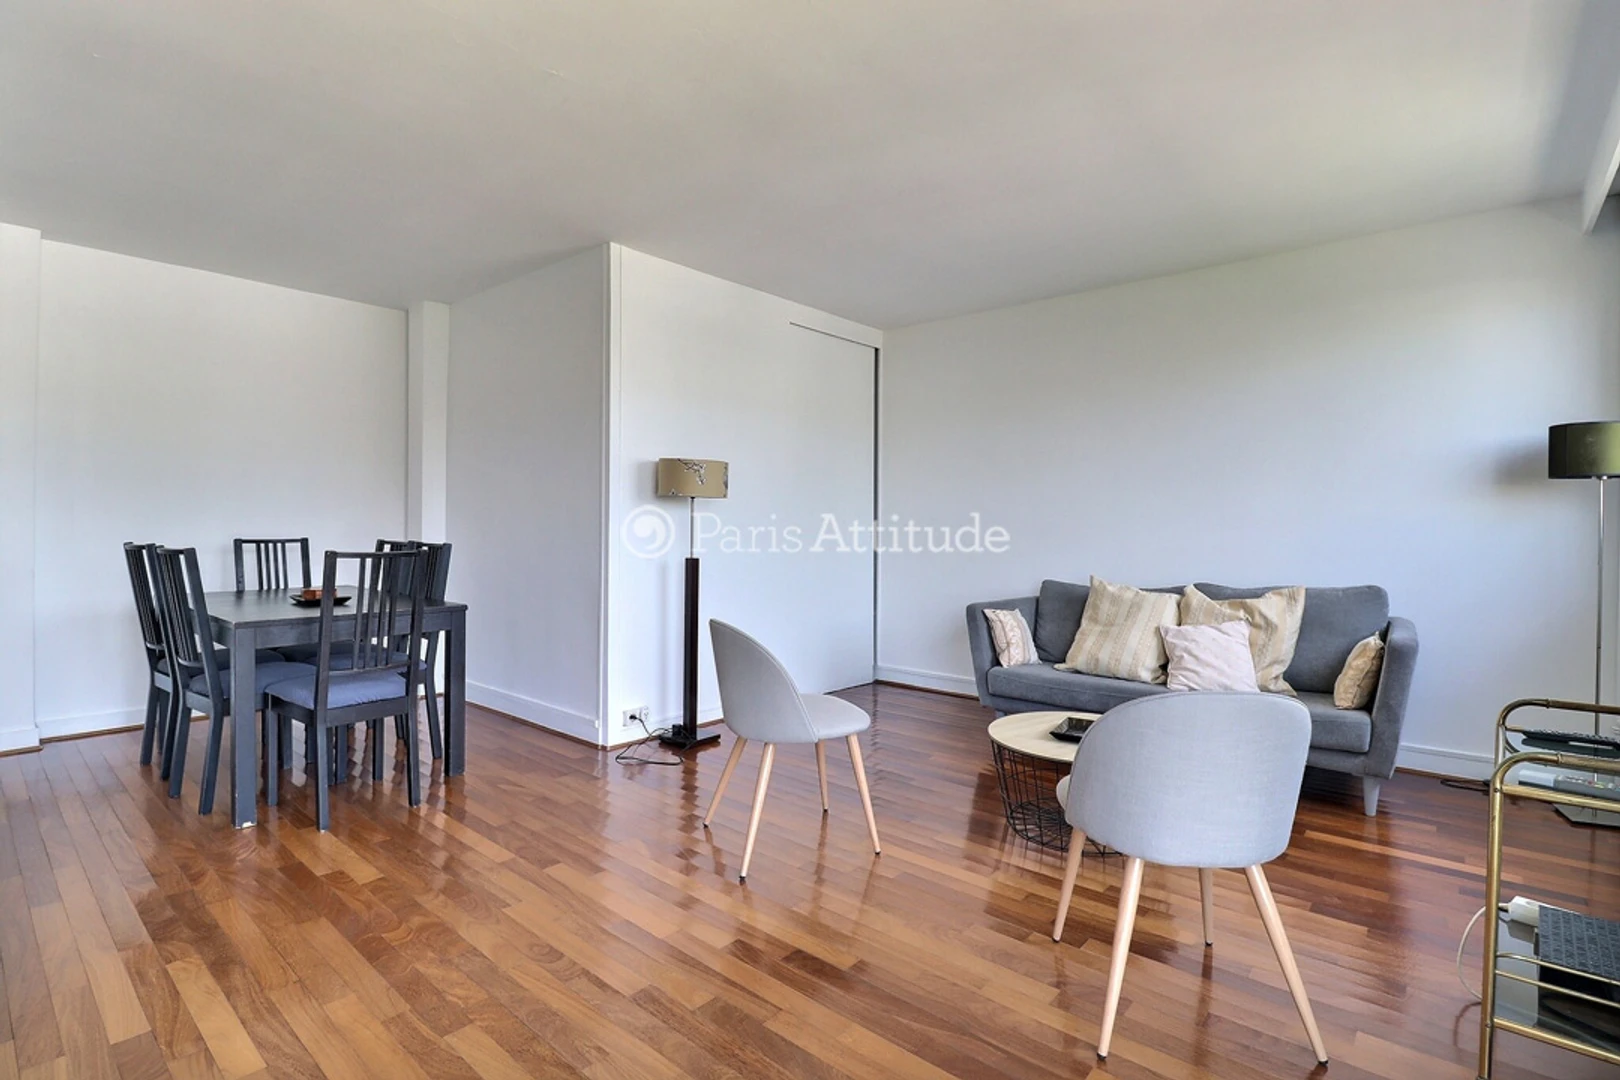 Accommodation in the centre of Boulogne-billancourt